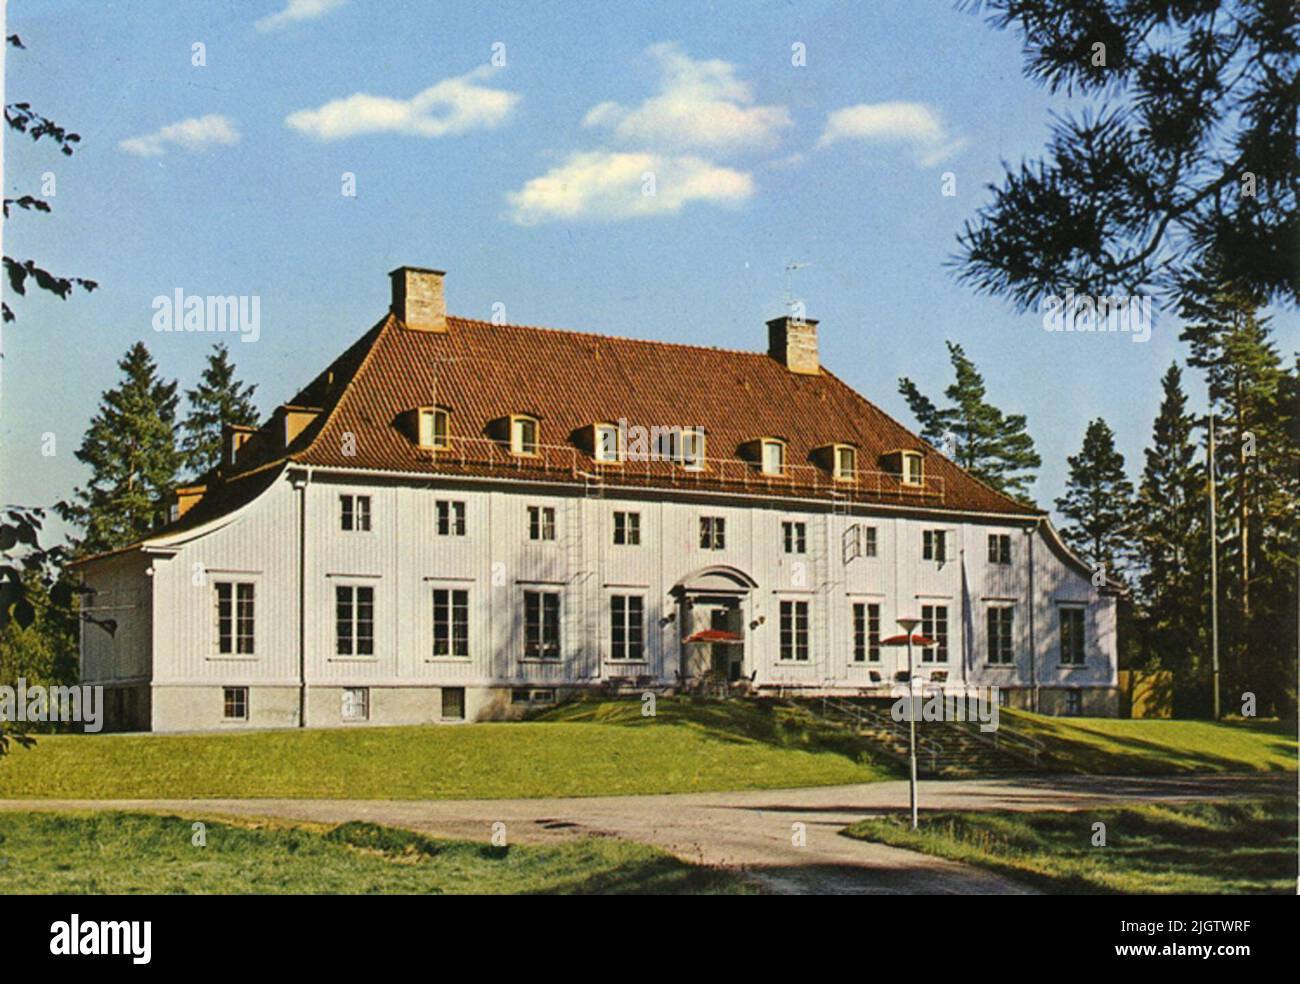 Text on the card: 'Tyringhemmet in Hindås. The A-house'. Available in the local archive .ter Boman from Hovmanstorp in Kronobergslän, which in 1909 started a boarding school for girls in Tyringe in Skåne. The school was named Tyringe full board. At the start, the school had 8 pupils with quickly got more. In 1912 the school was moved to a rented property at Nolhaga Castle. But it also quickly became too small. In 1914 the school was moved again and then to Hindås station area where Ester Boman bought properties that she redone to suit the girls' school. The school had to retain the original na Stock Photo